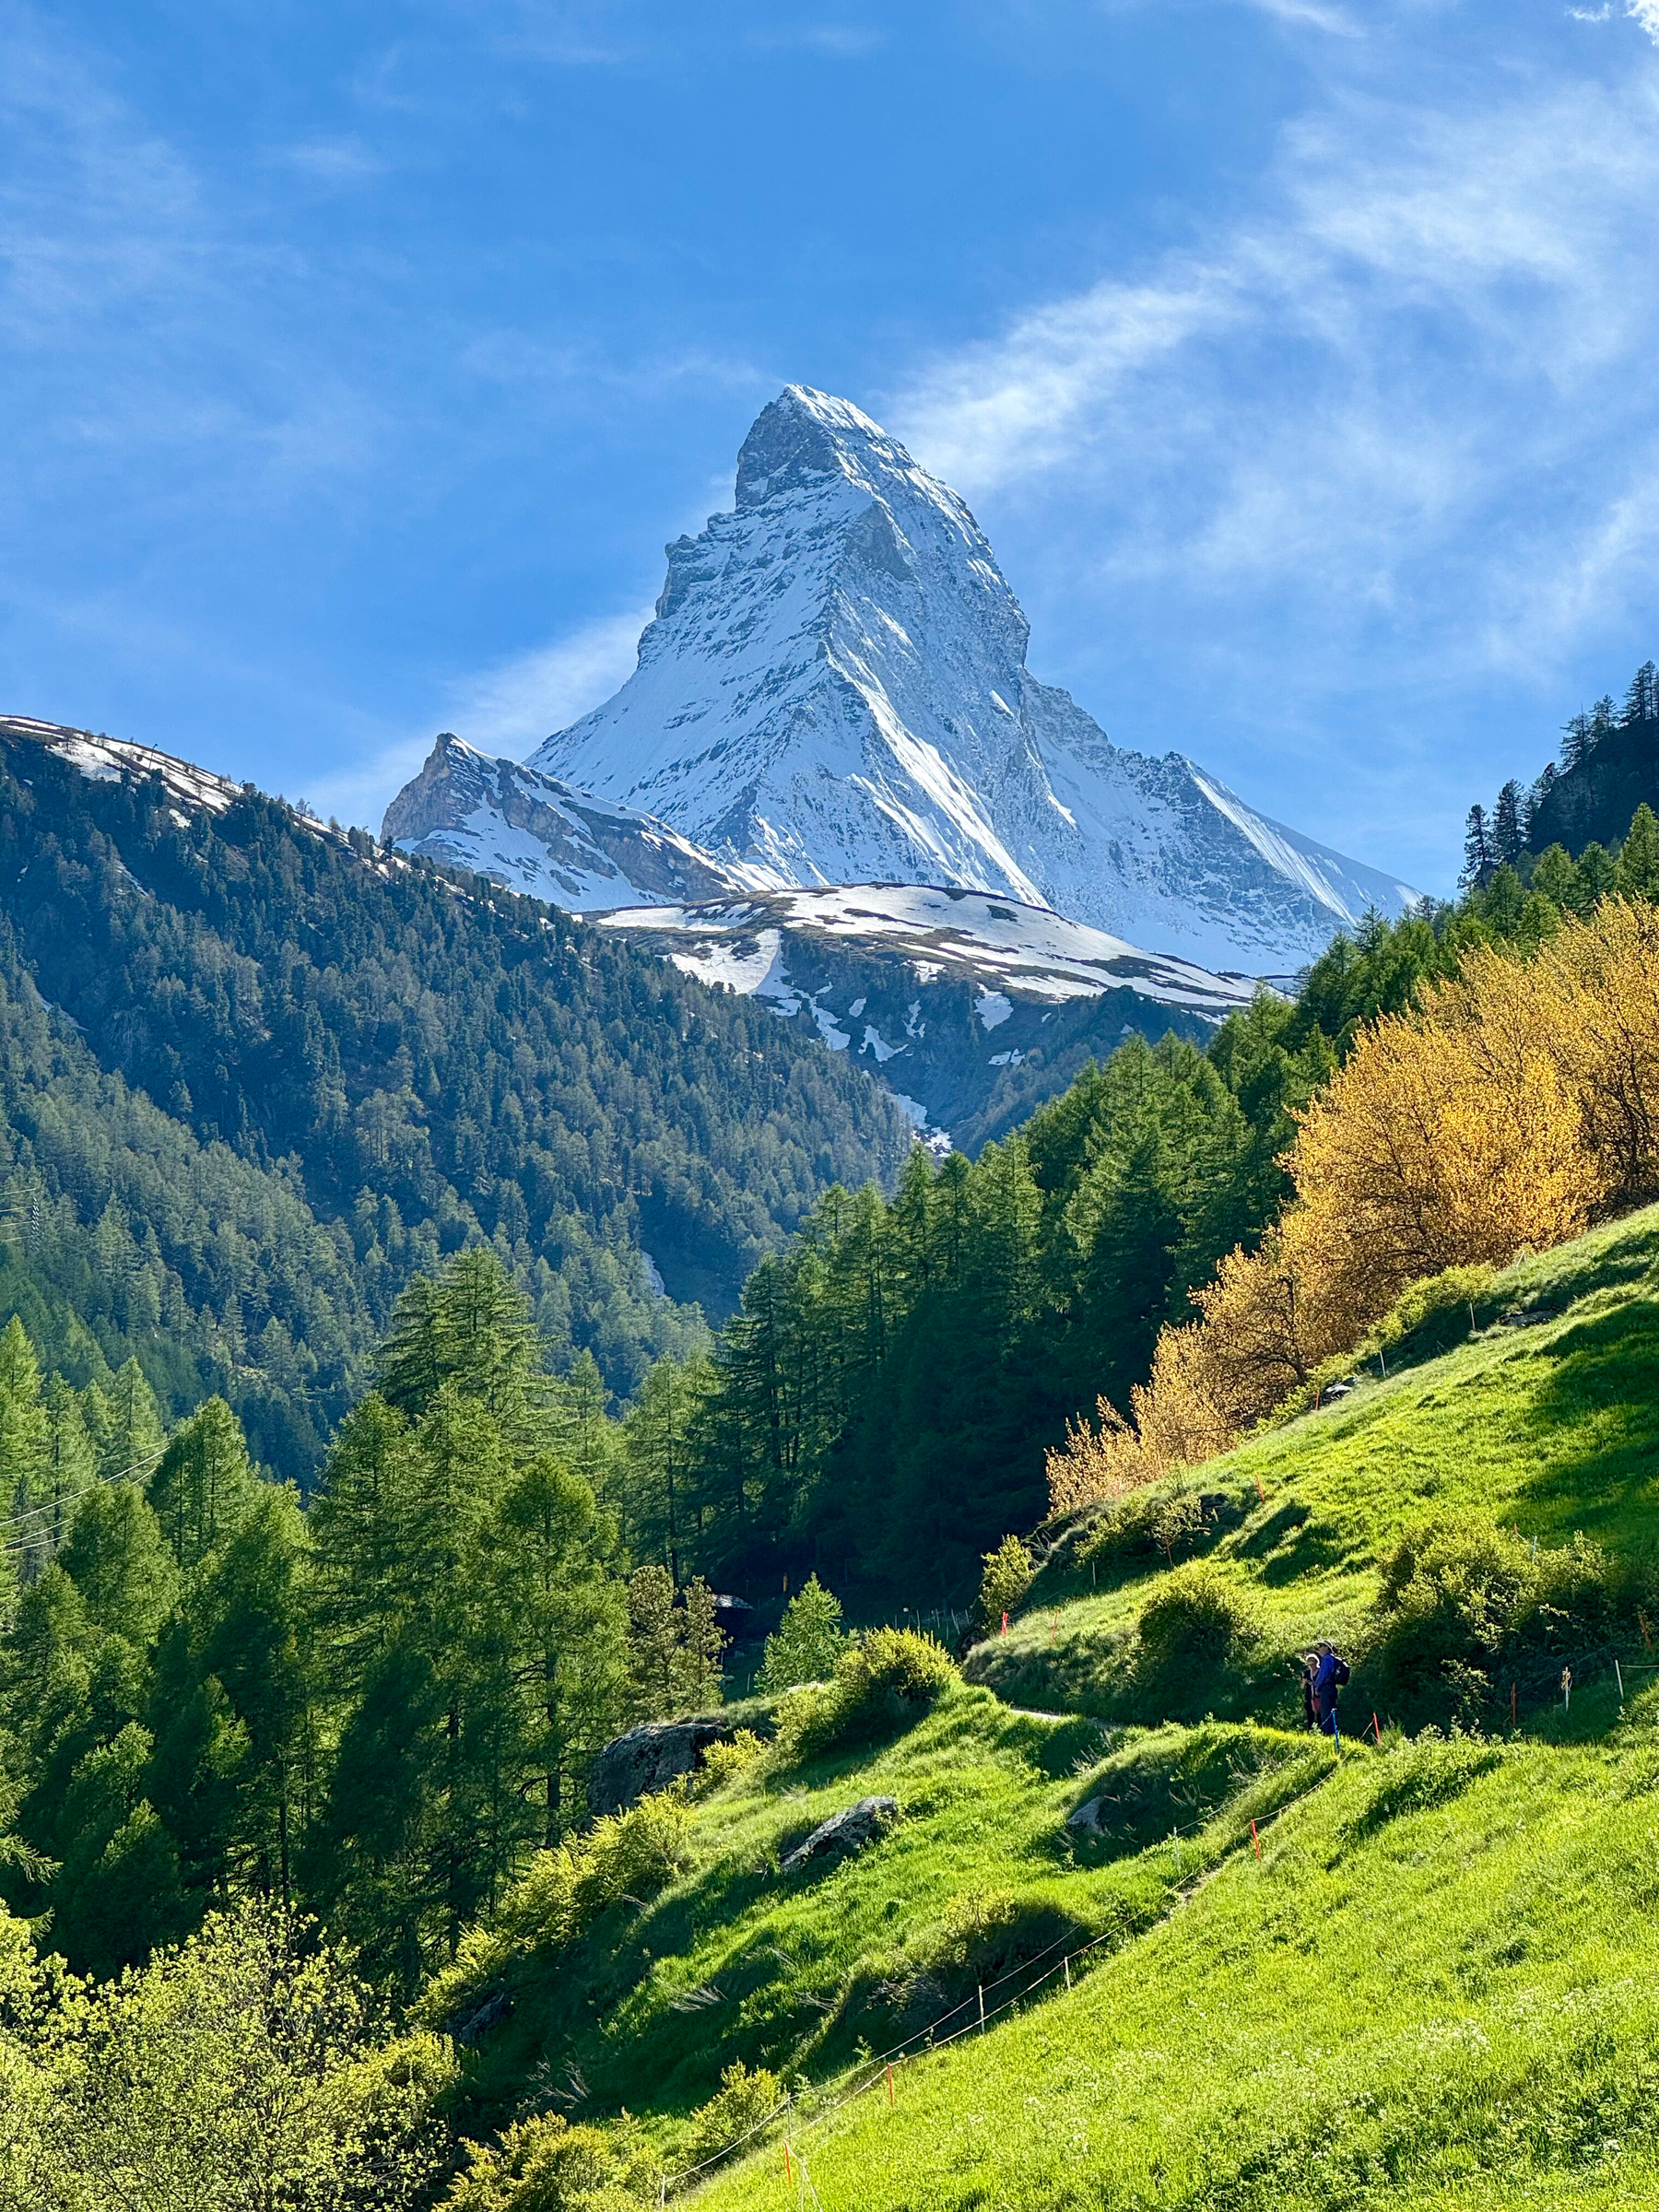 A majestic, snow-capped mountain peak rising behind a green, forested hillside with a clear blue sky above.